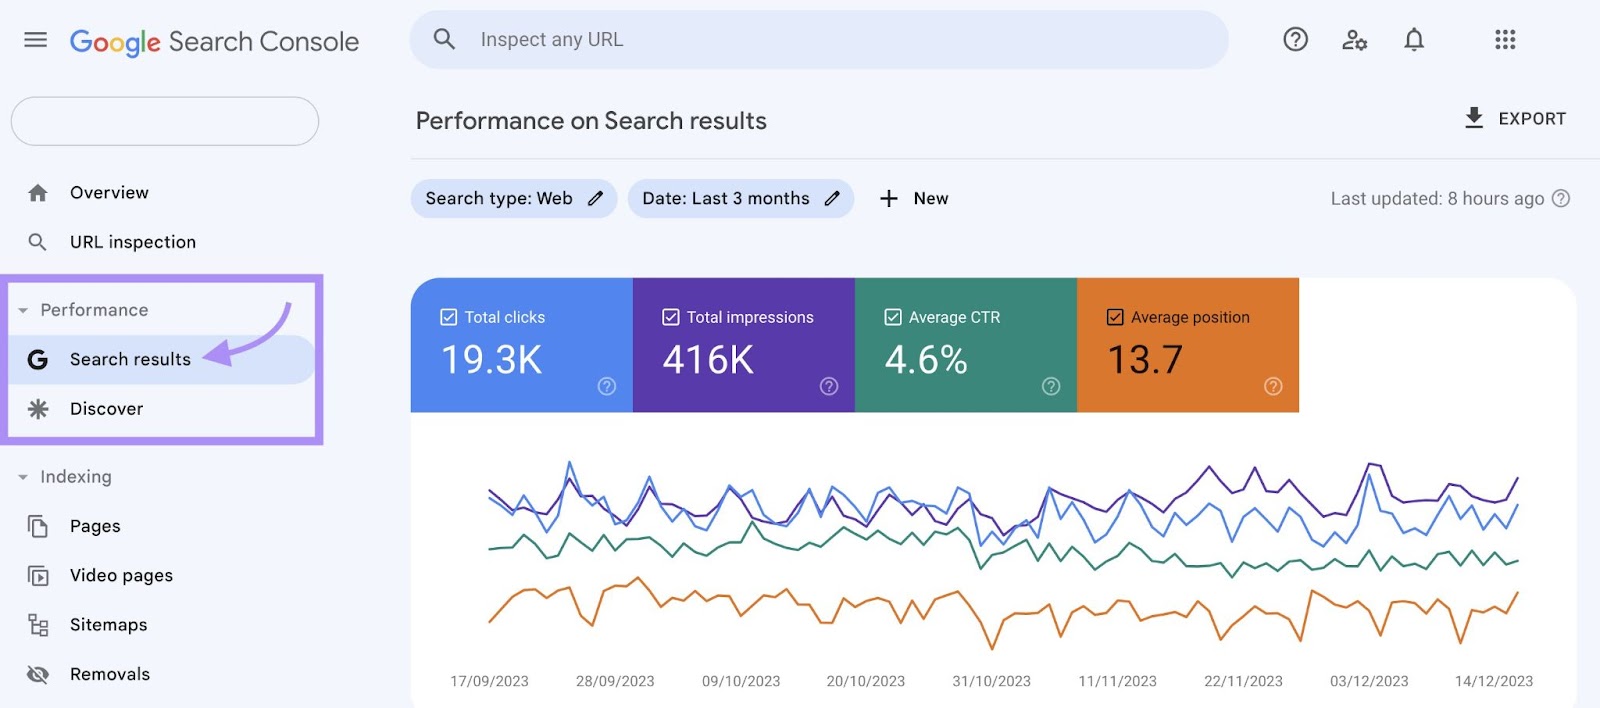 "Performance on Search results" graph in Google Search Console